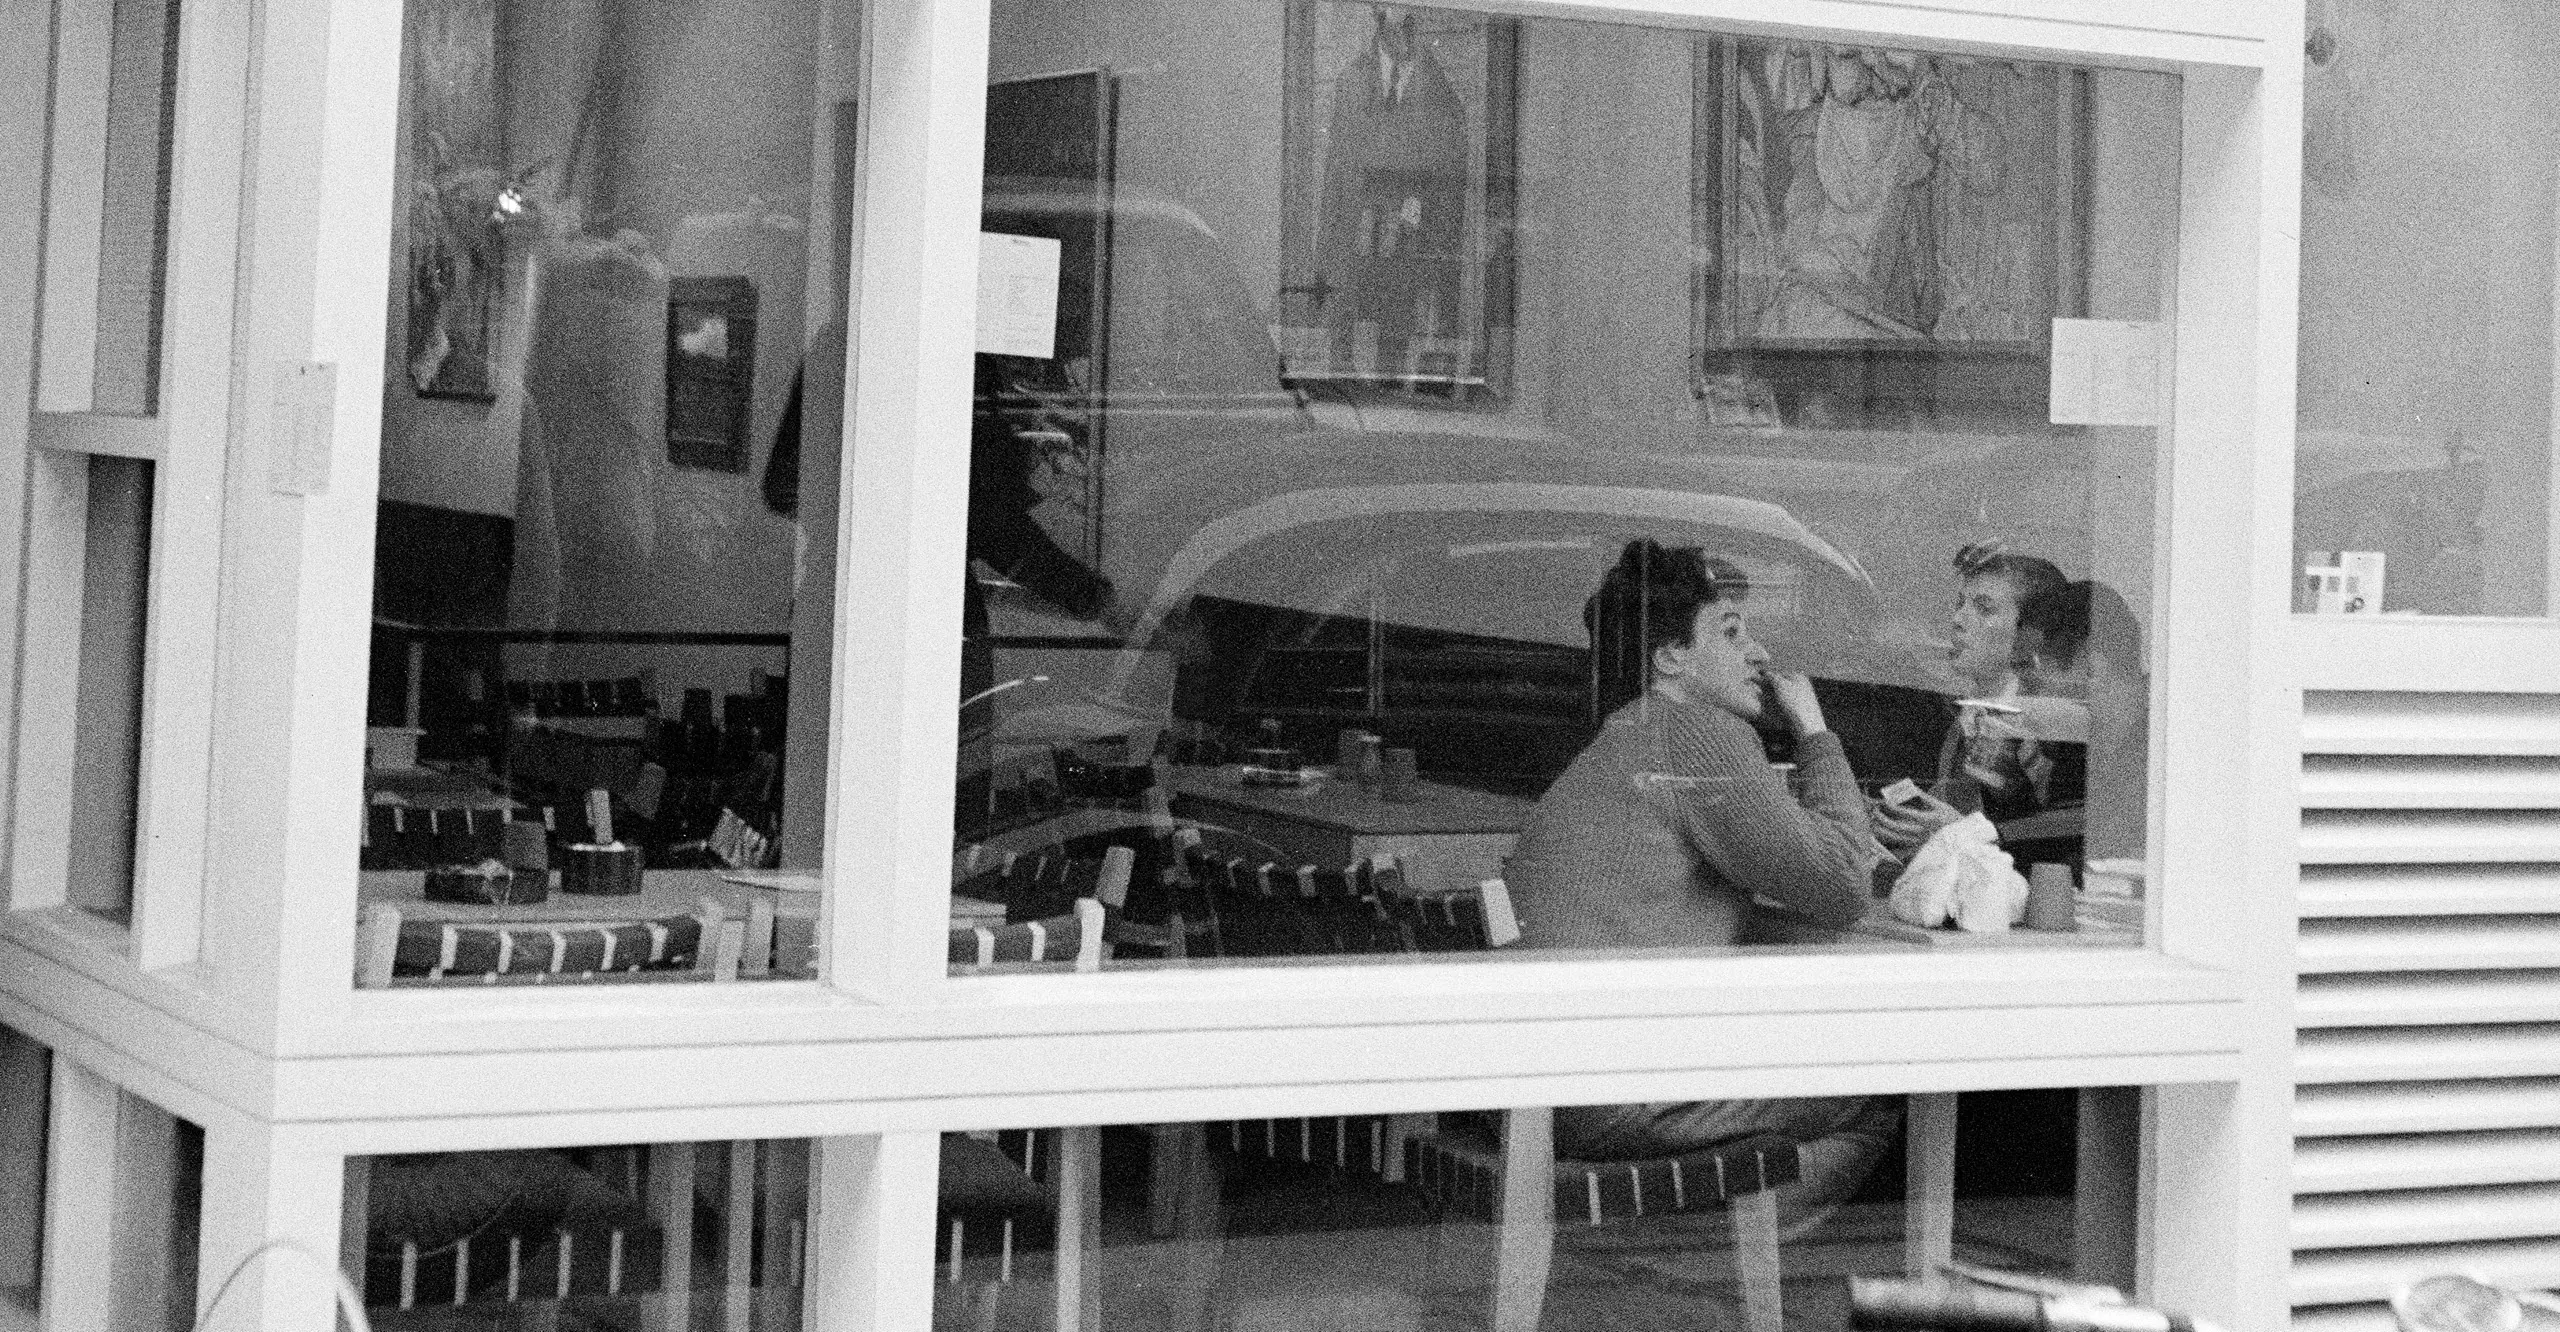 Image of The Partisan Coffee House window, showing 2 people inside sitting on a table. Showcased at The Photographers' Gallery in London